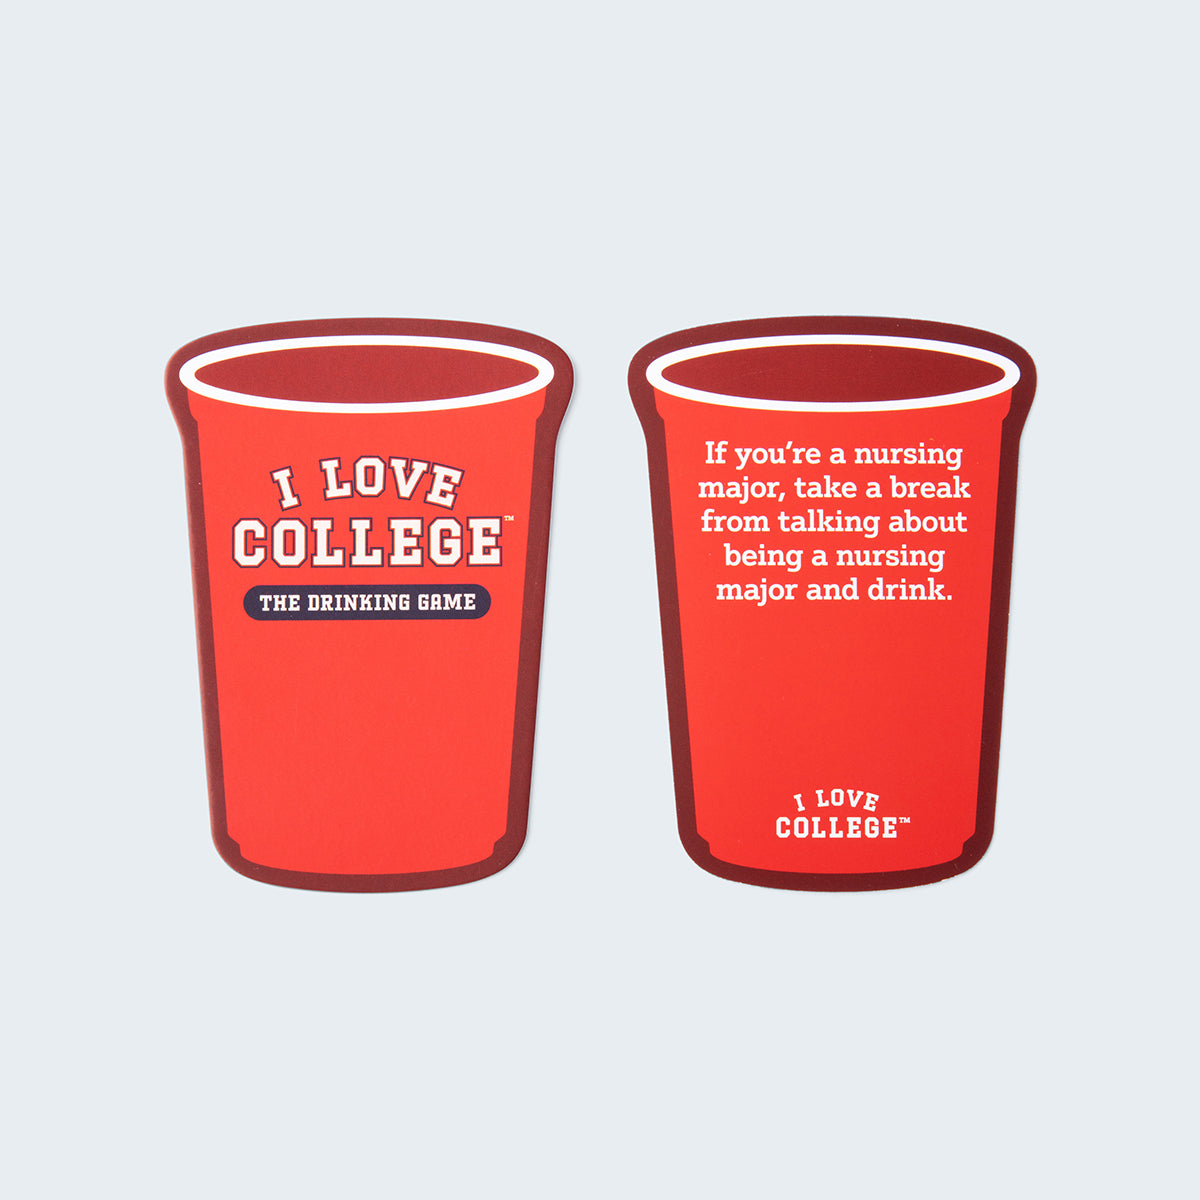 I Love College - Drinking Game